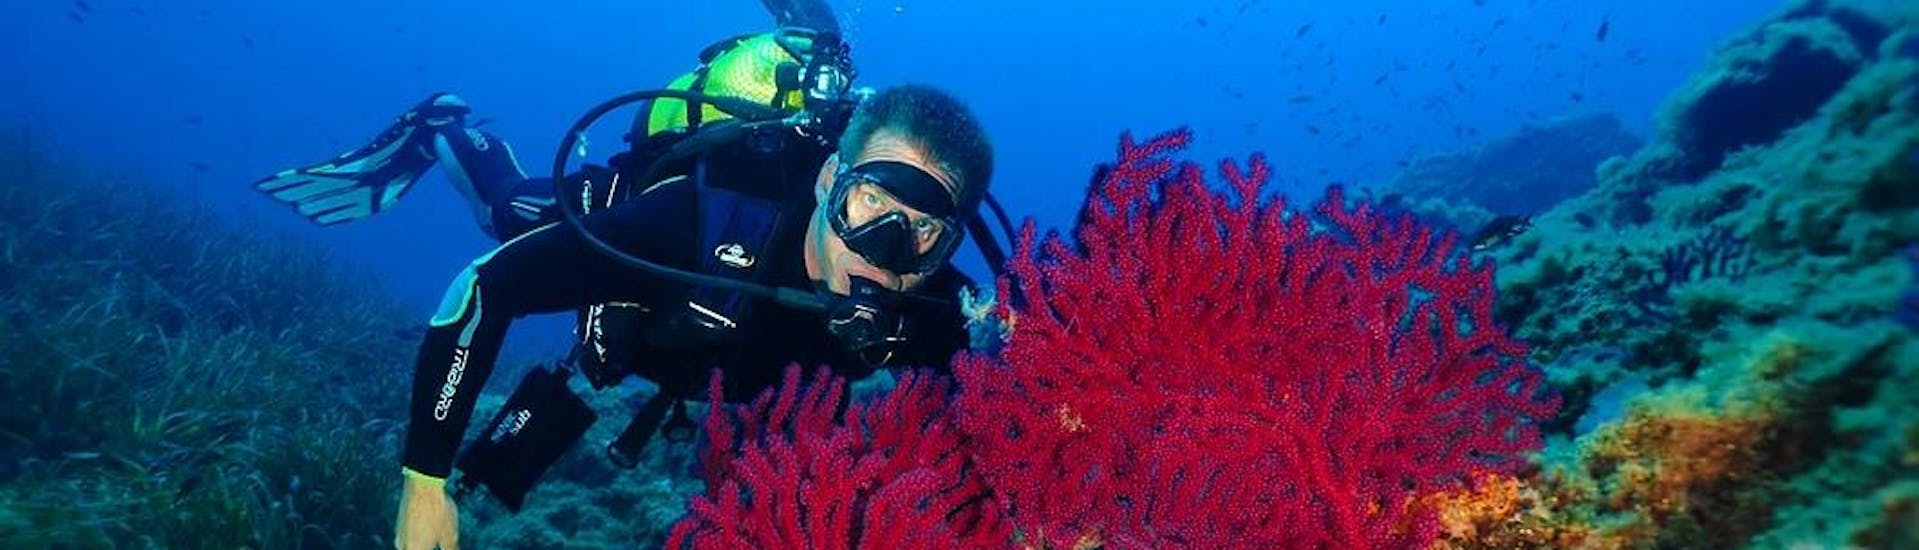 An instructor is showing the underwater beauties to a tourist for his test dive at Lion de Mer with Aventure Sous-Marine Saint-Raphaël.